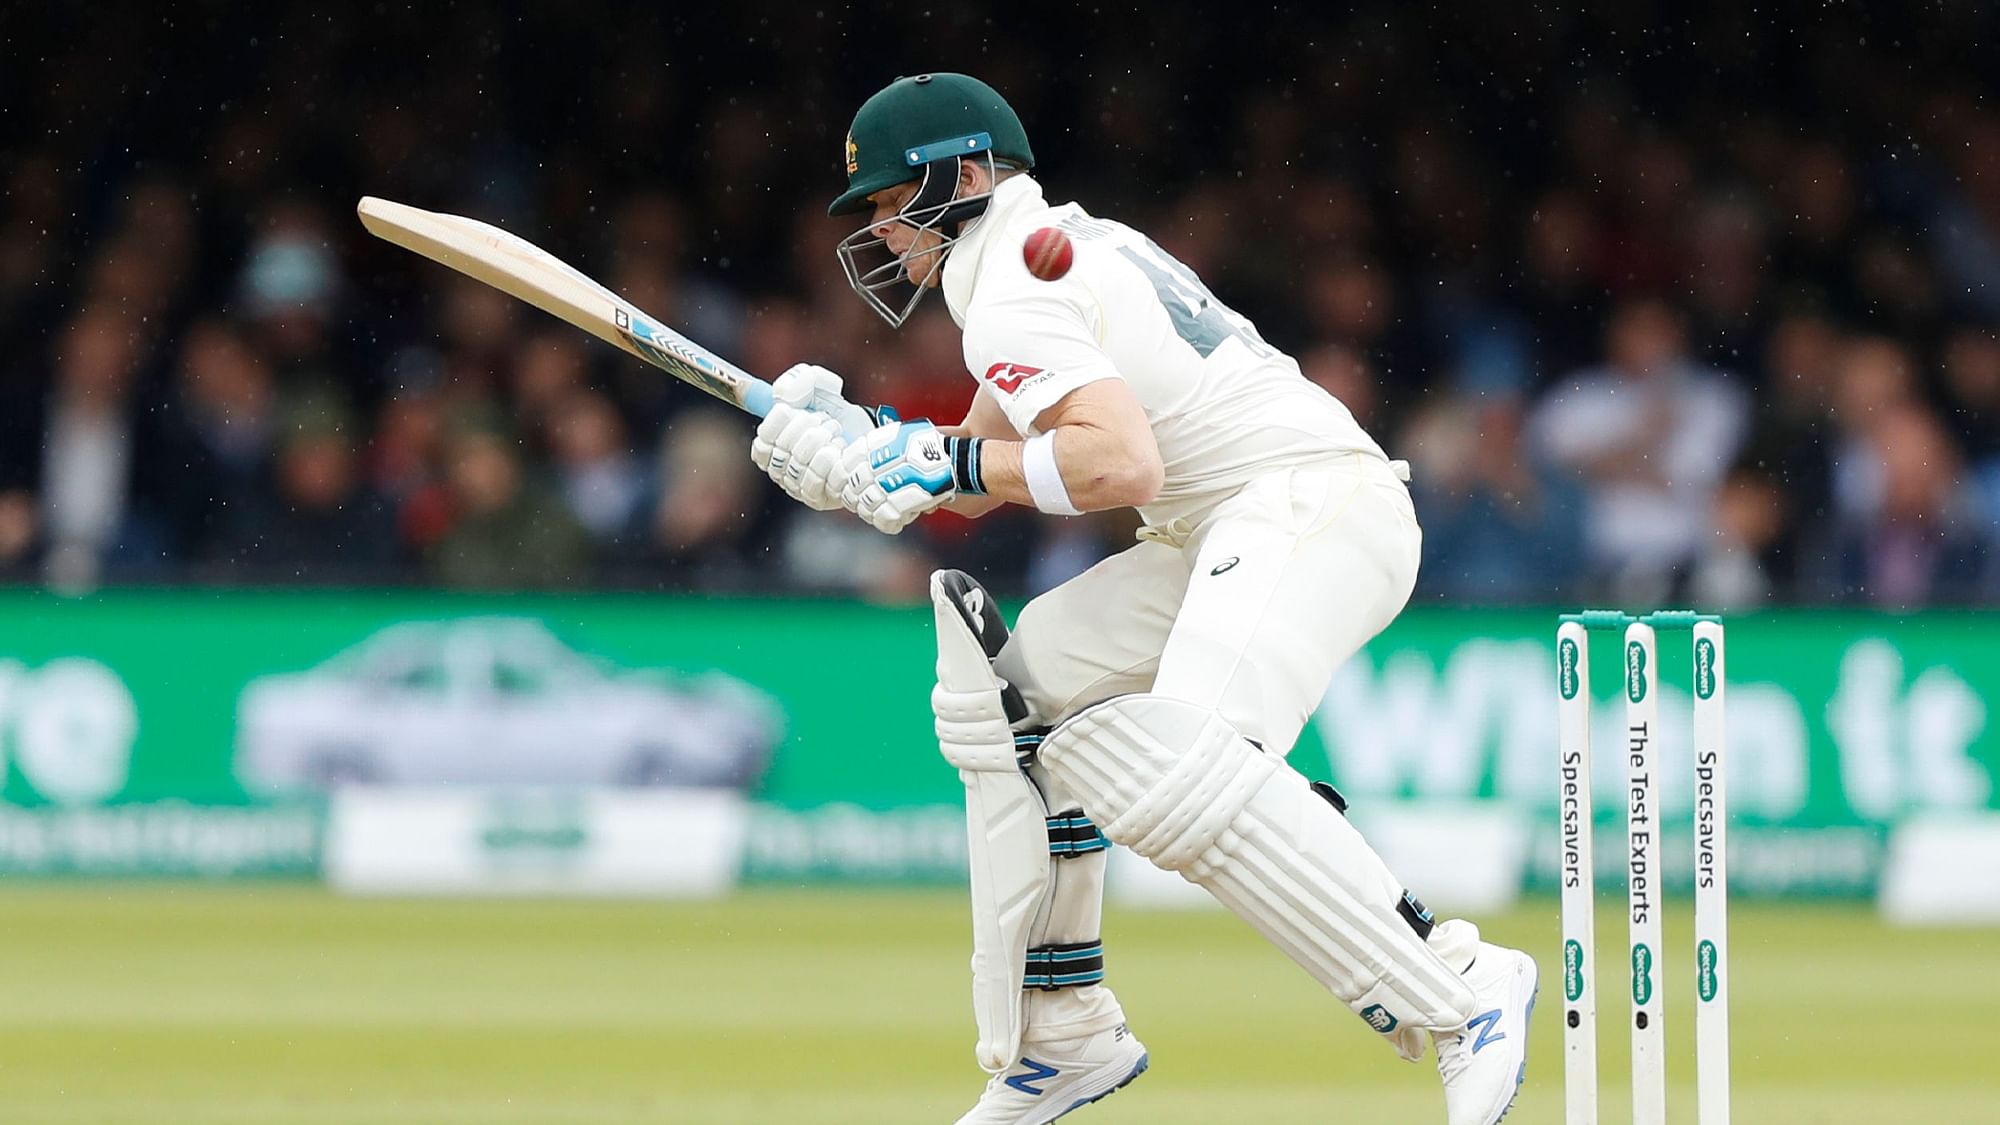 In the ongoing Lord’s Test which has so far been marred by rain interruptions, Steve Smith has come out with new ways to leave balls outside the off-stump.